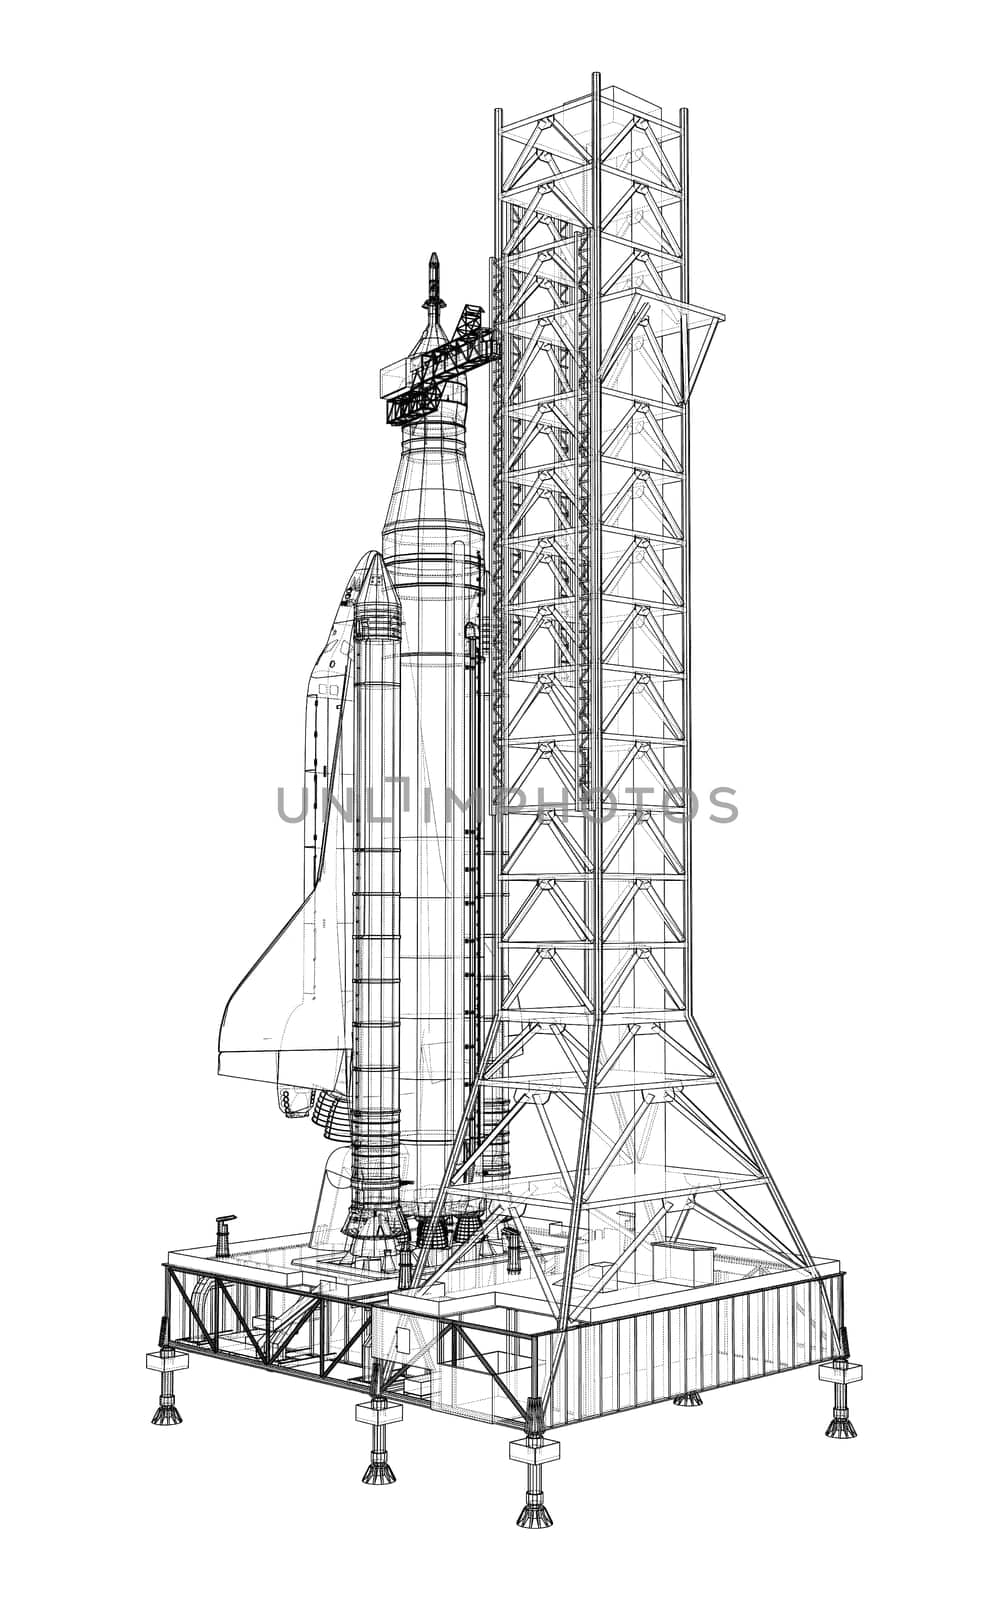 Space Rocket on launch pad. 3d illustration. Wire-frame style. Elements of this image furnished by NASA